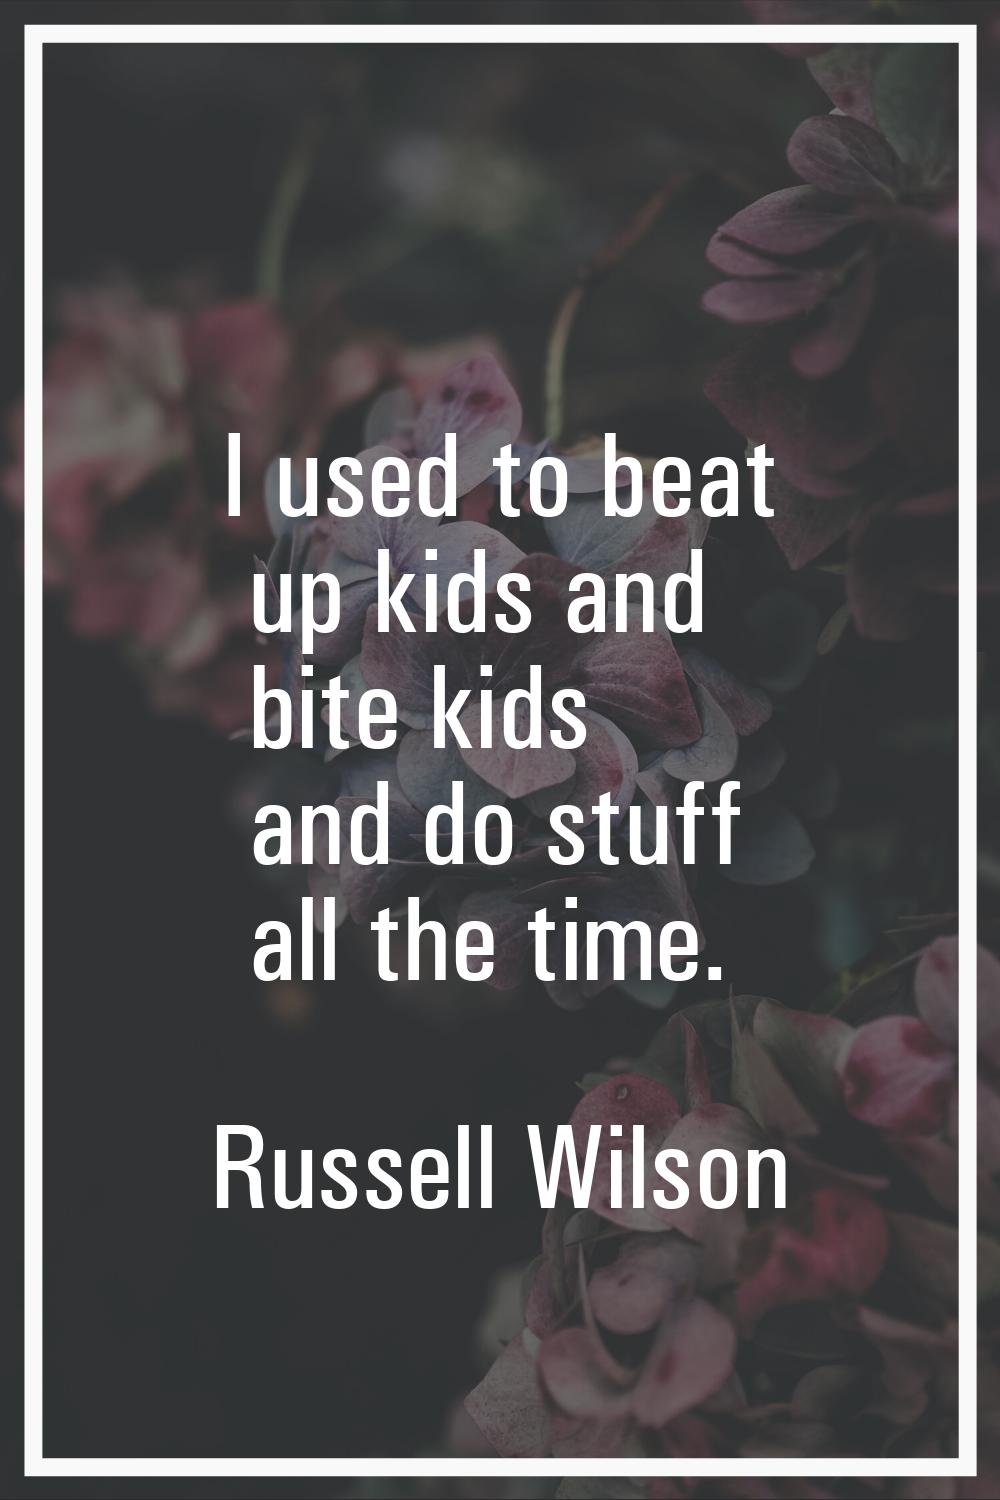 I used to beat up kids and bite kids and do stuff all the time.